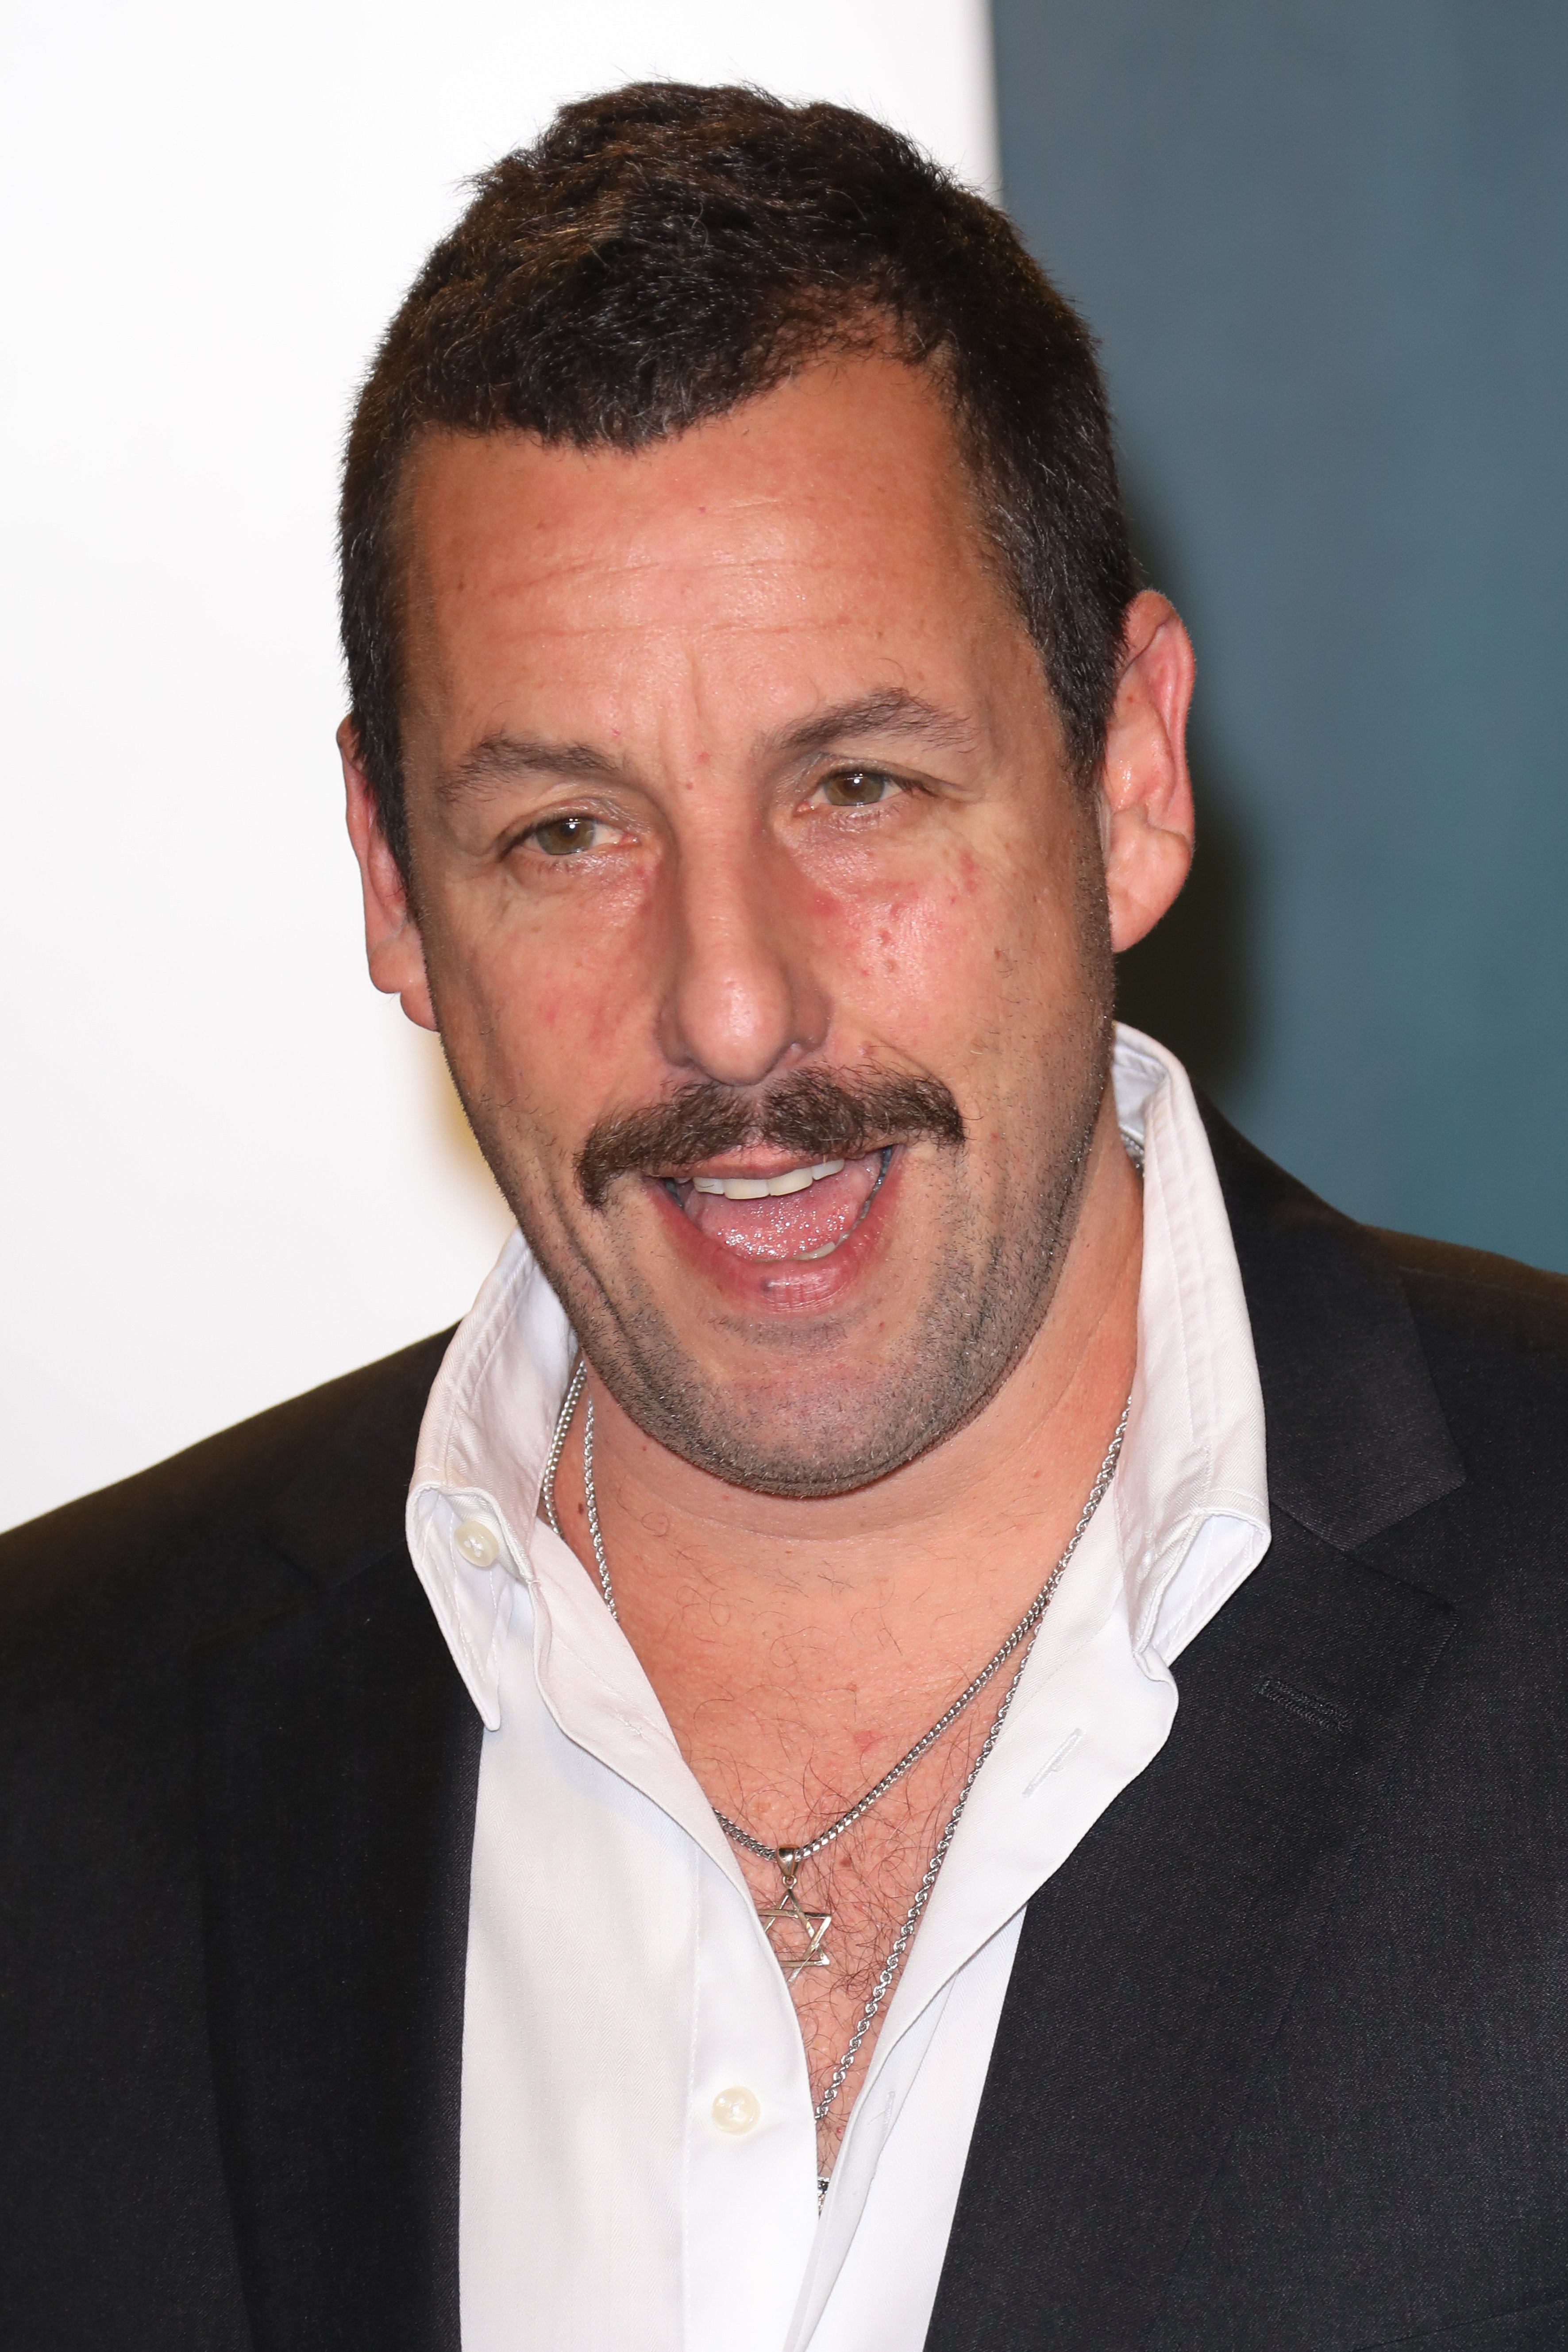 Adam Sandler attends the 2020 Vanity Fair Oscar Party at Wallis Annenberg Center for the Performing Arts on February 9, 2020, in Beverly Hills, California. | Source: Getty Images